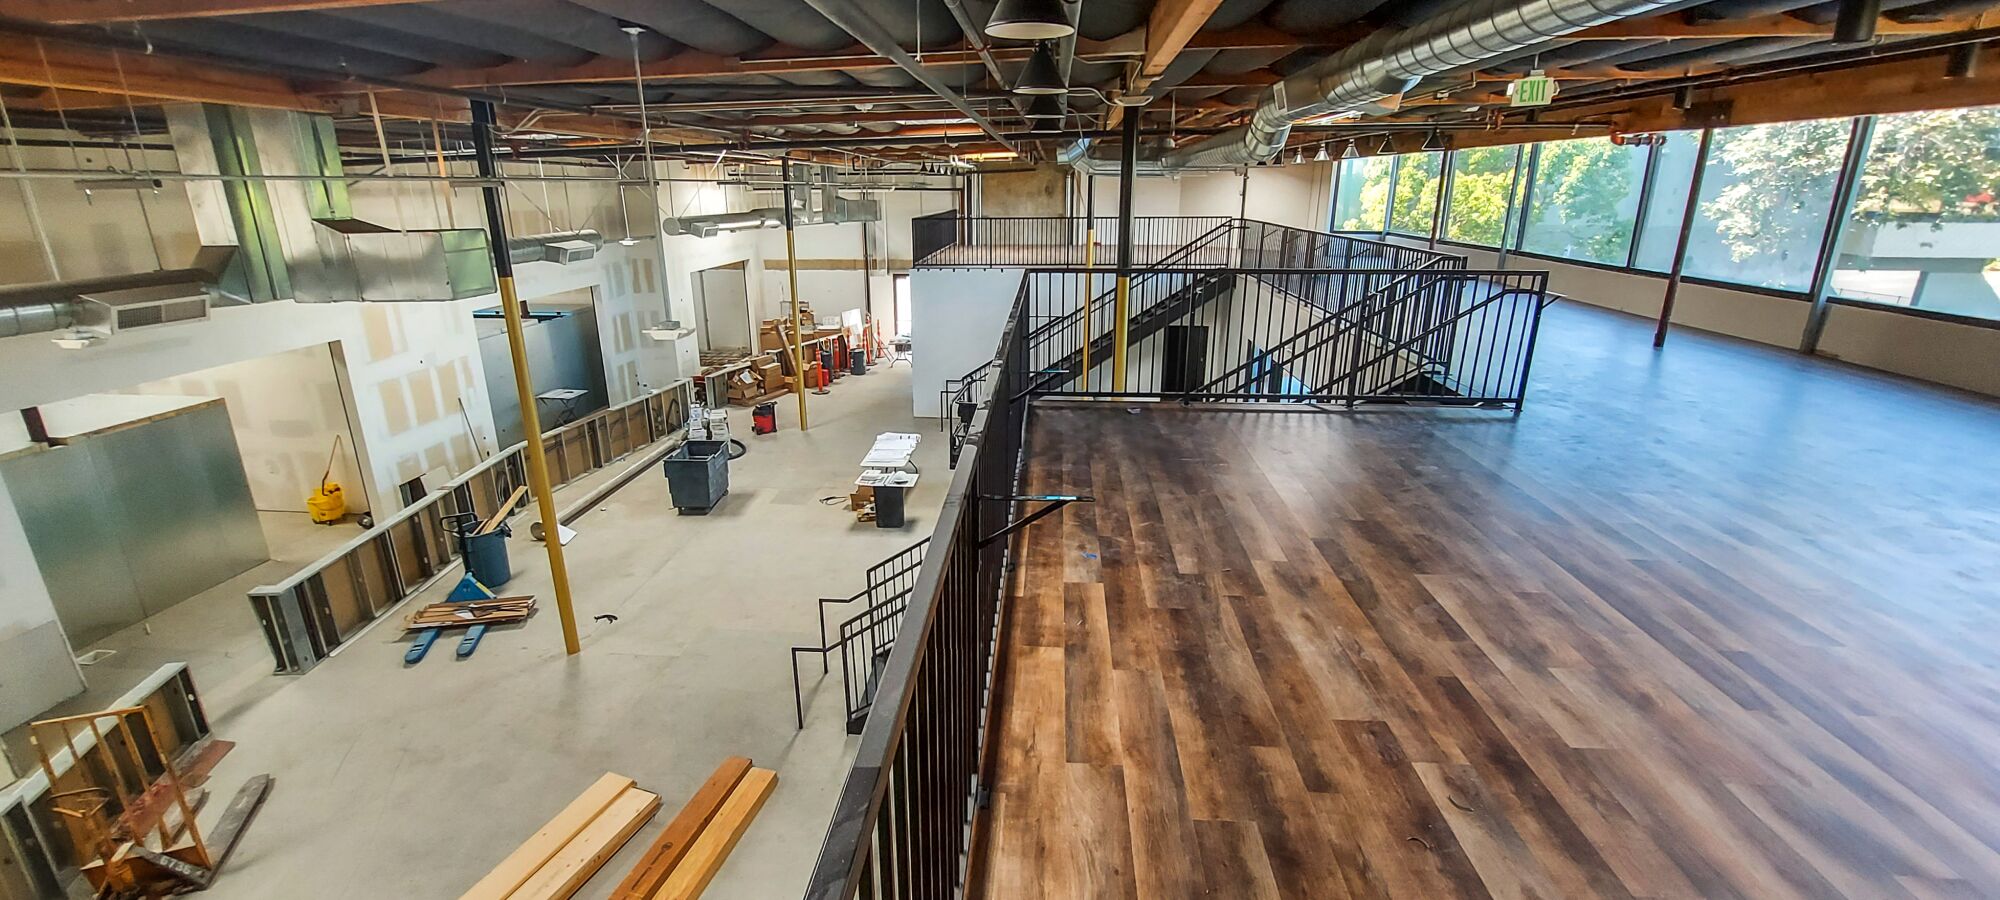 The ground level of Co-Lab’s tasting room comes in at 2,500 square feet.